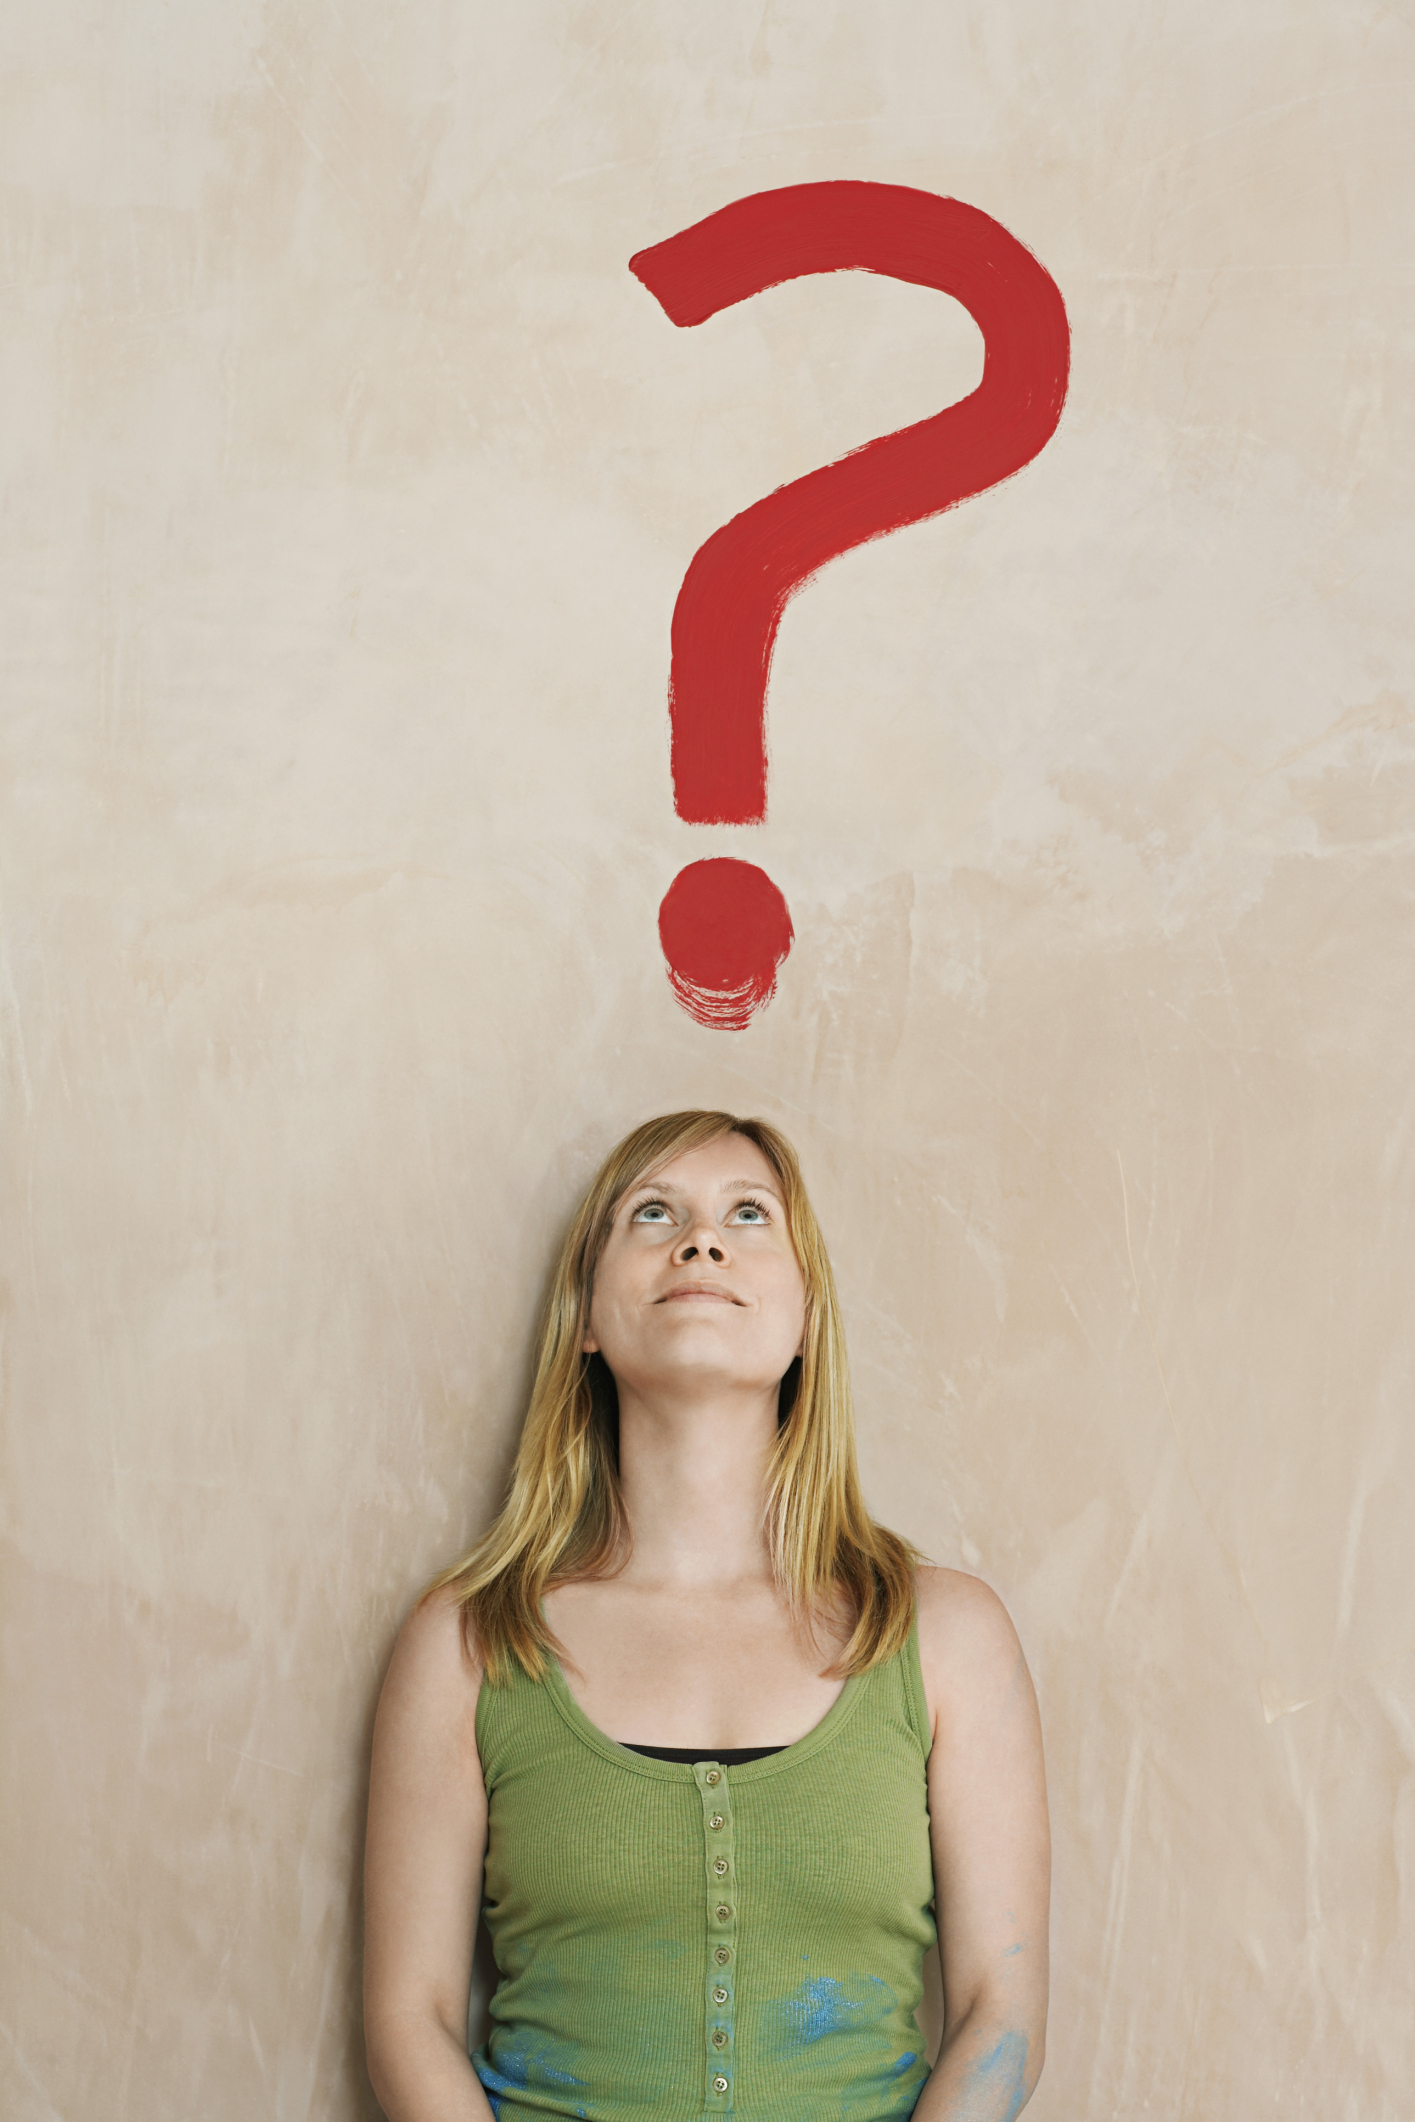 ADHD test. A woman in a green shirt stares up at an imaginary red question mark and wonders, 'Do I have adhd?' She takes the ADD test for adults.